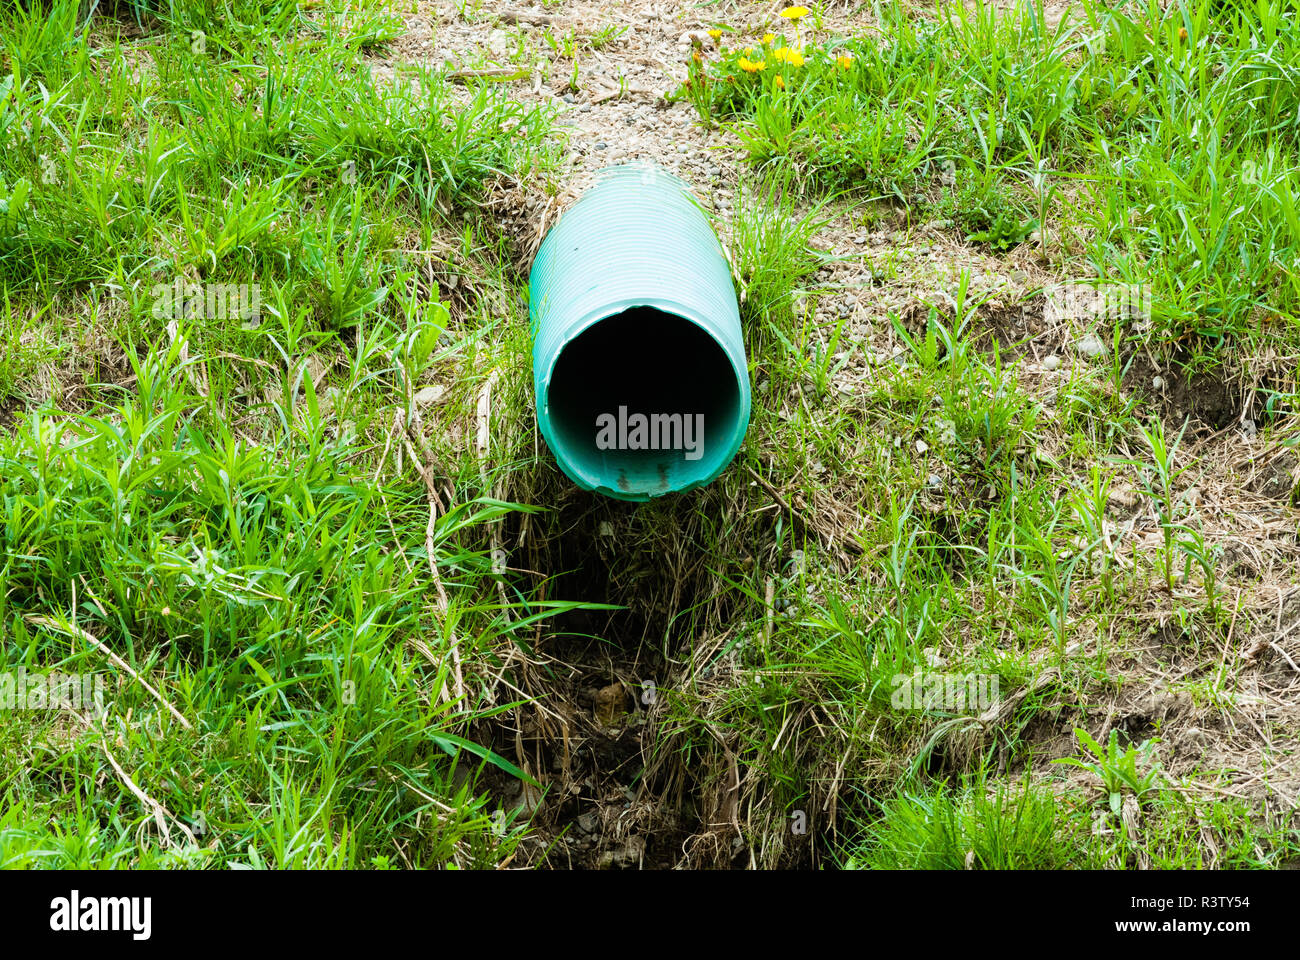 Plastic green drain pipe emerging from grassy ground Stock Photo